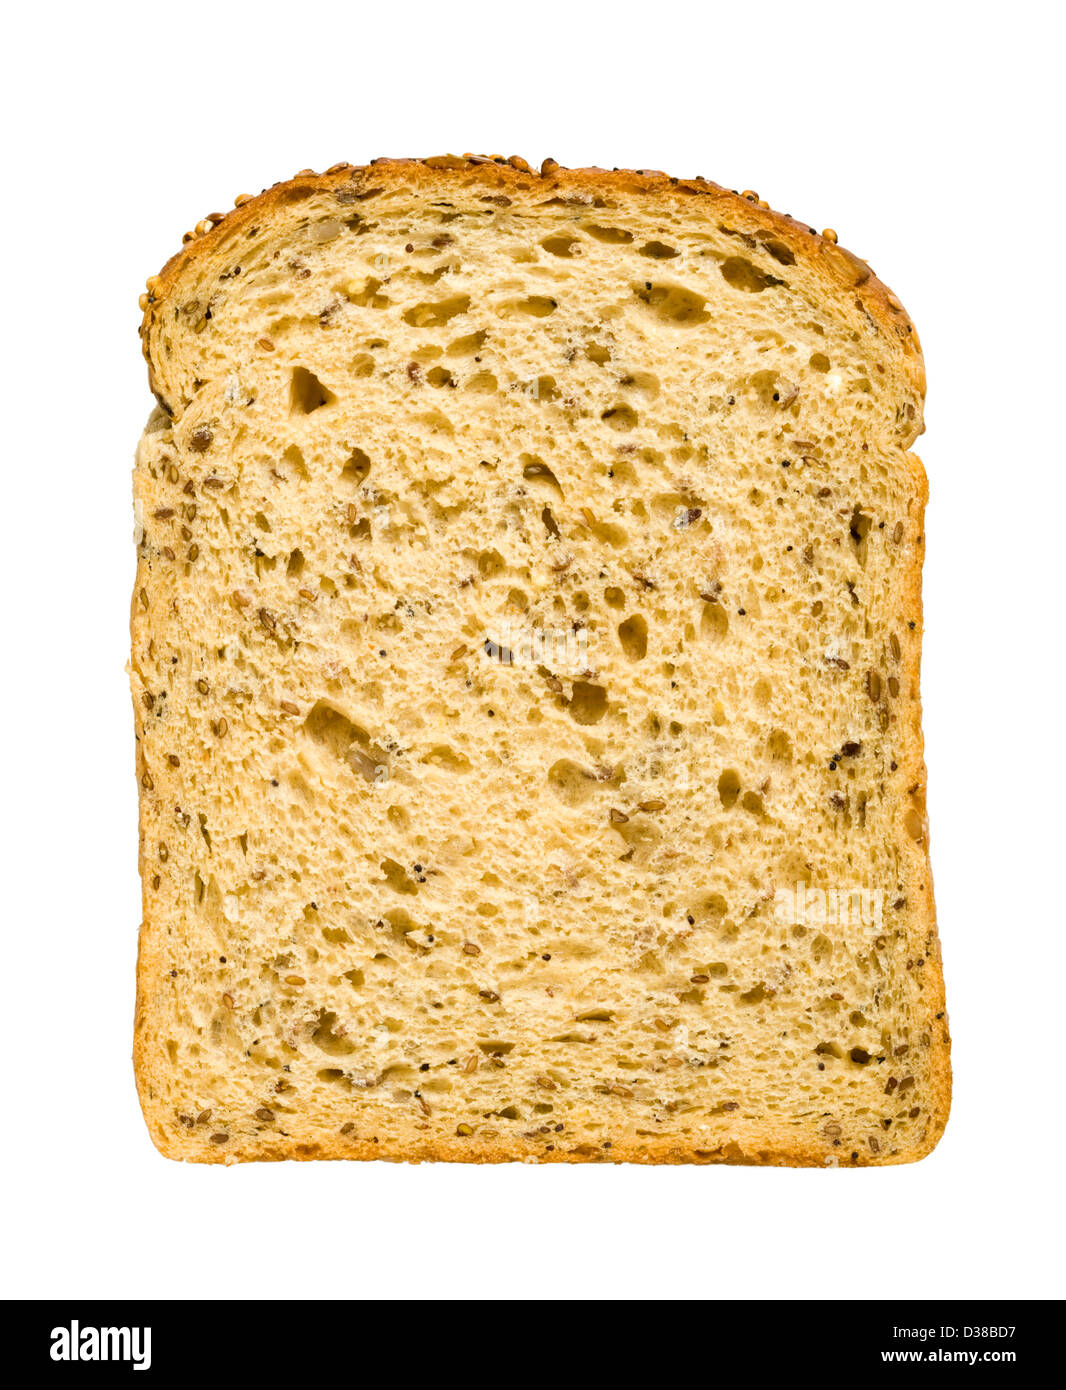 Brown (wholemeal) bread slice. Stock Photo